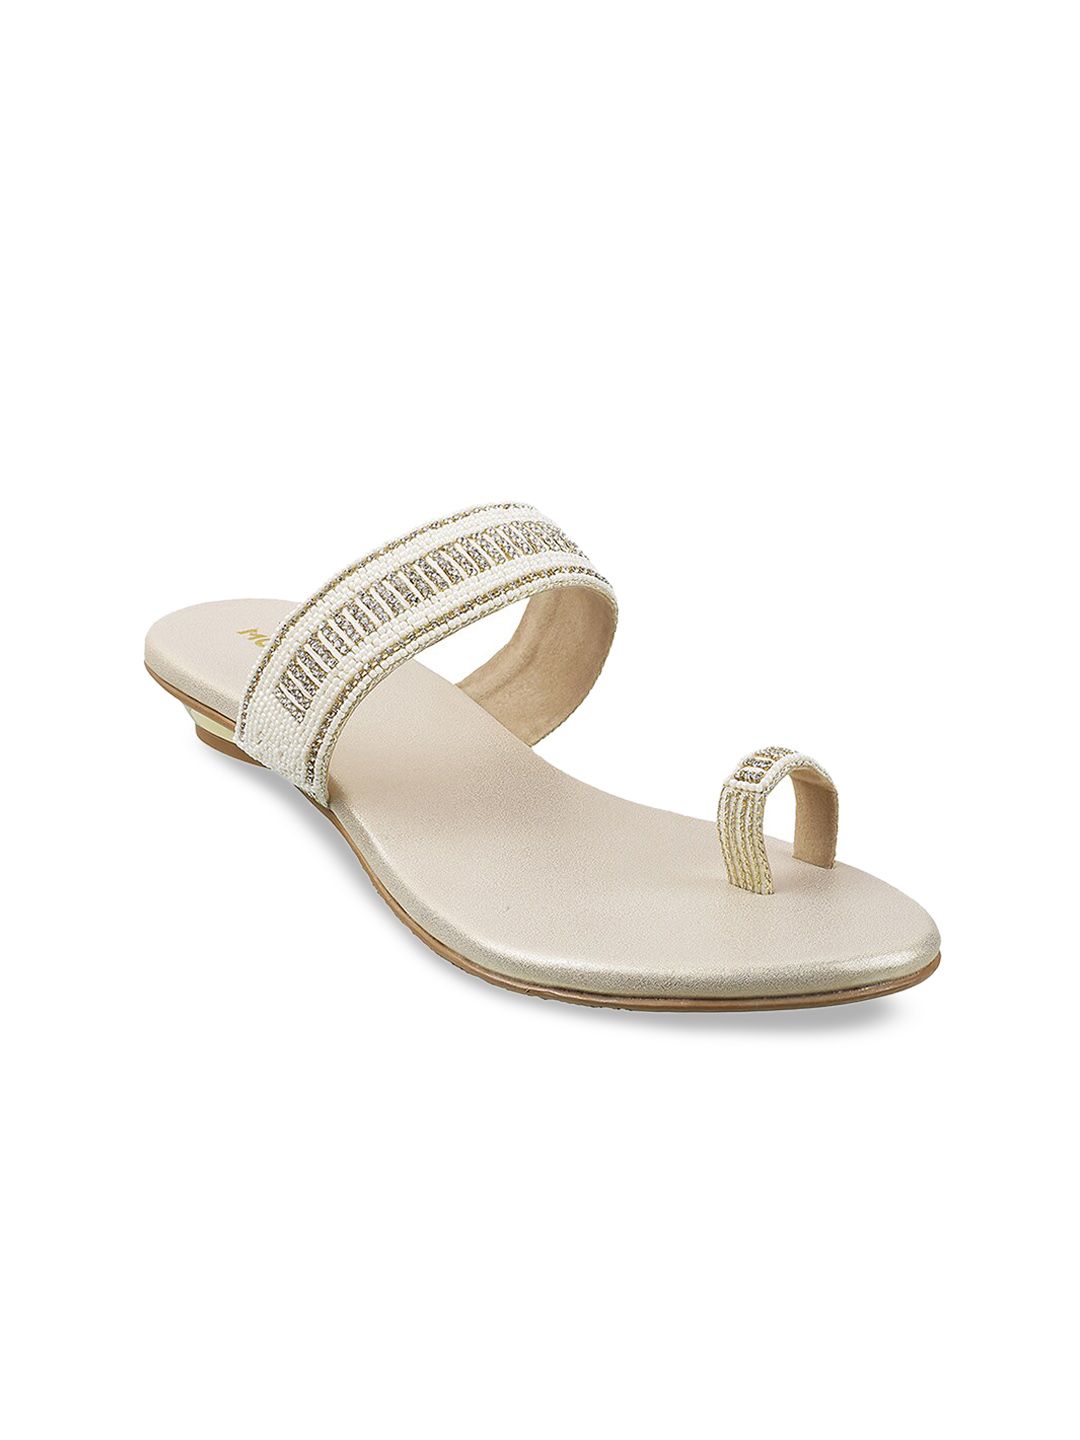 Mochi Off White Embellished Block Sandals Price in India